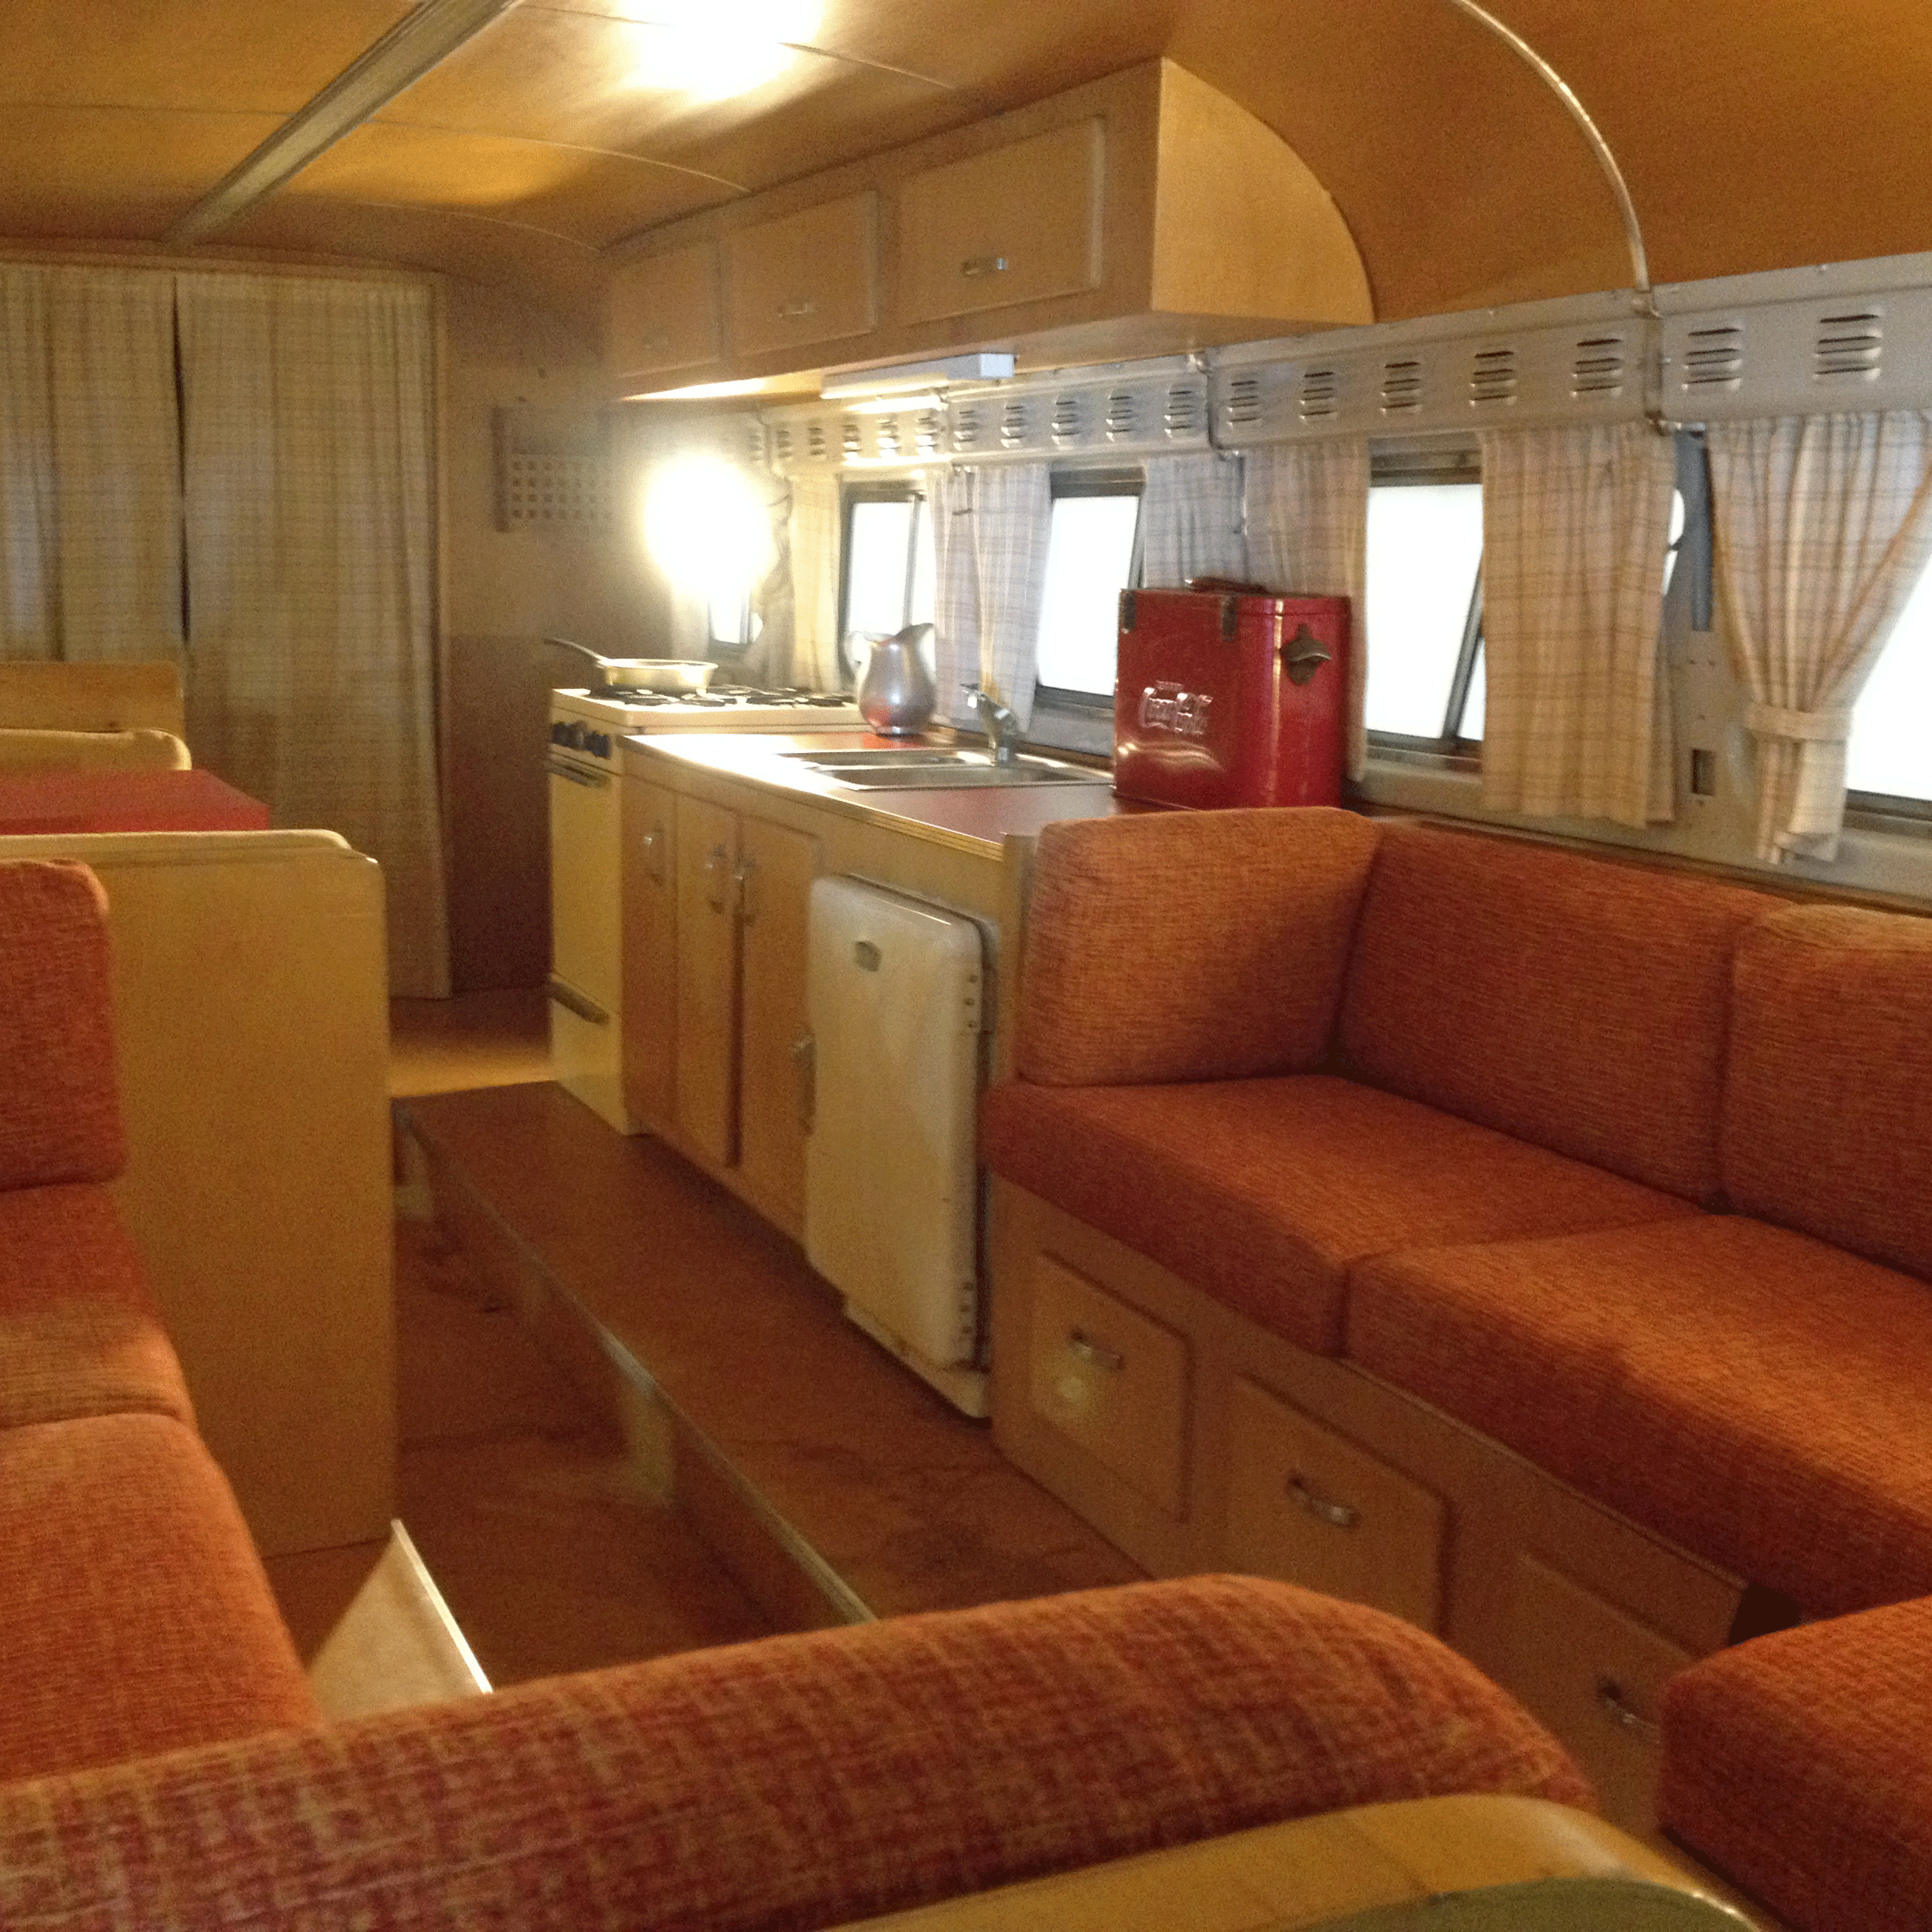 1948 Flxible Bus is motorhome that featured in the movie 